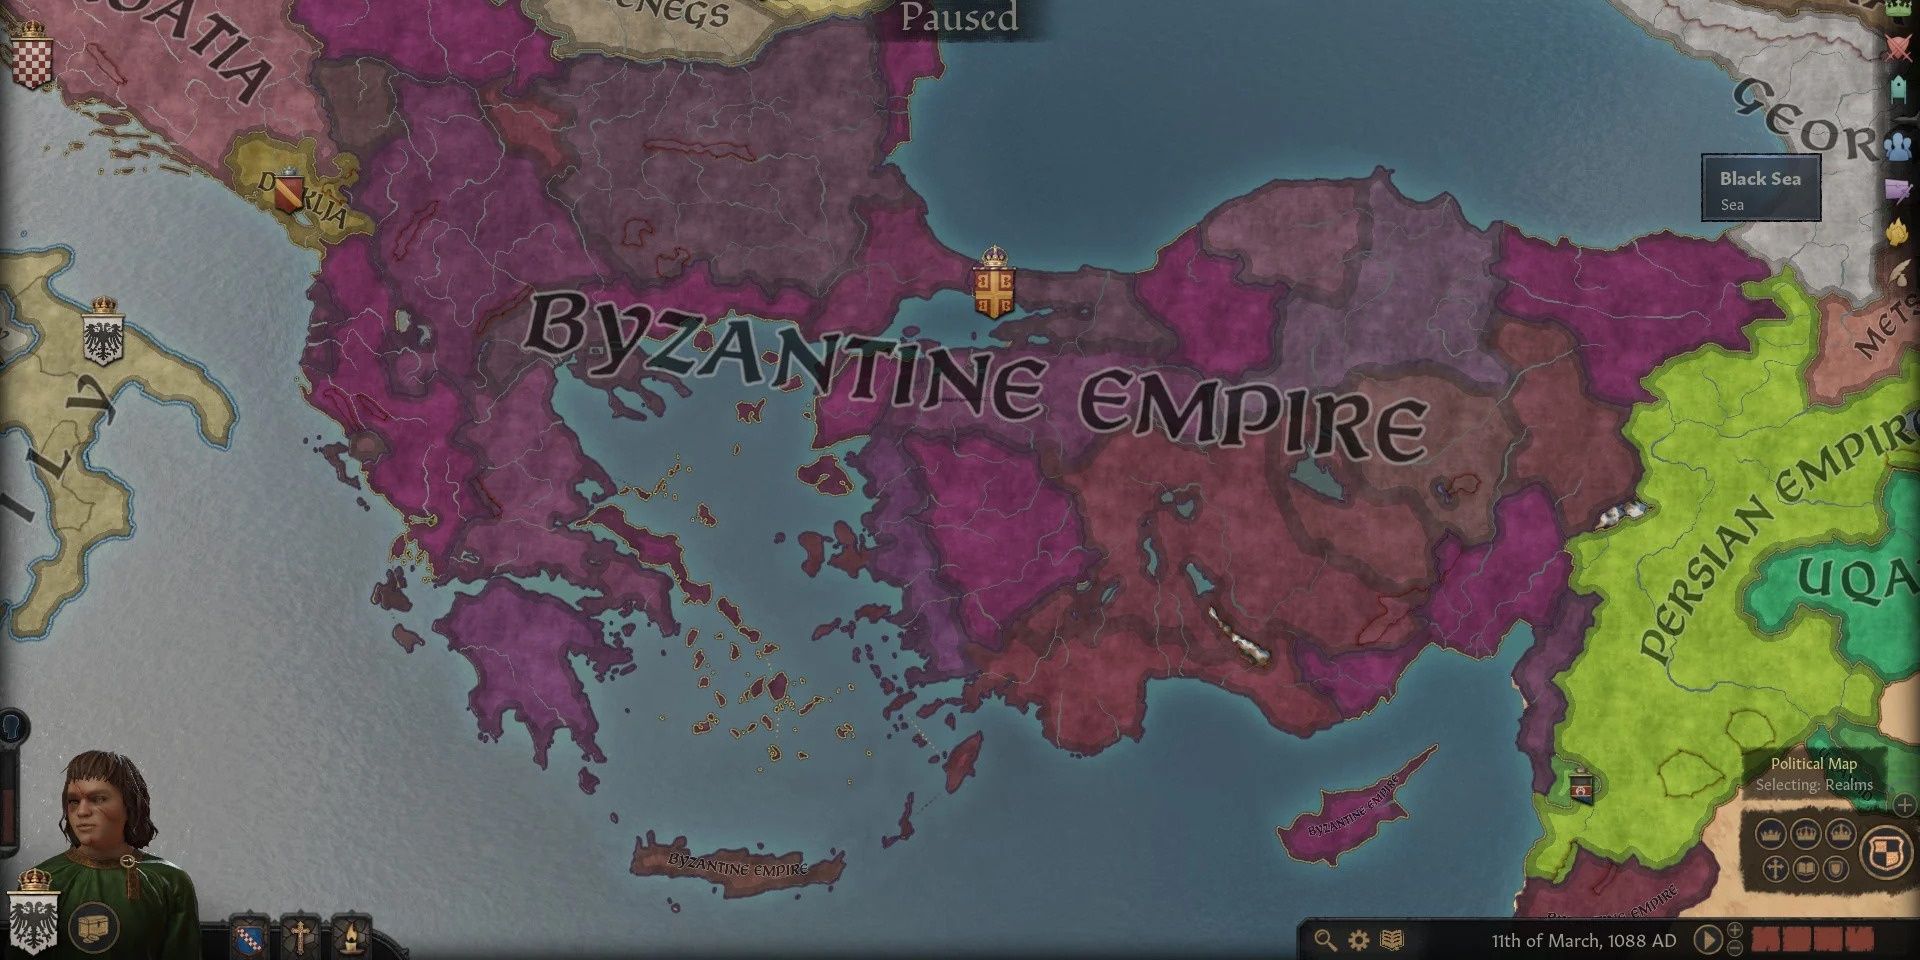 The Byzantine Empire in Crusader Kings 3